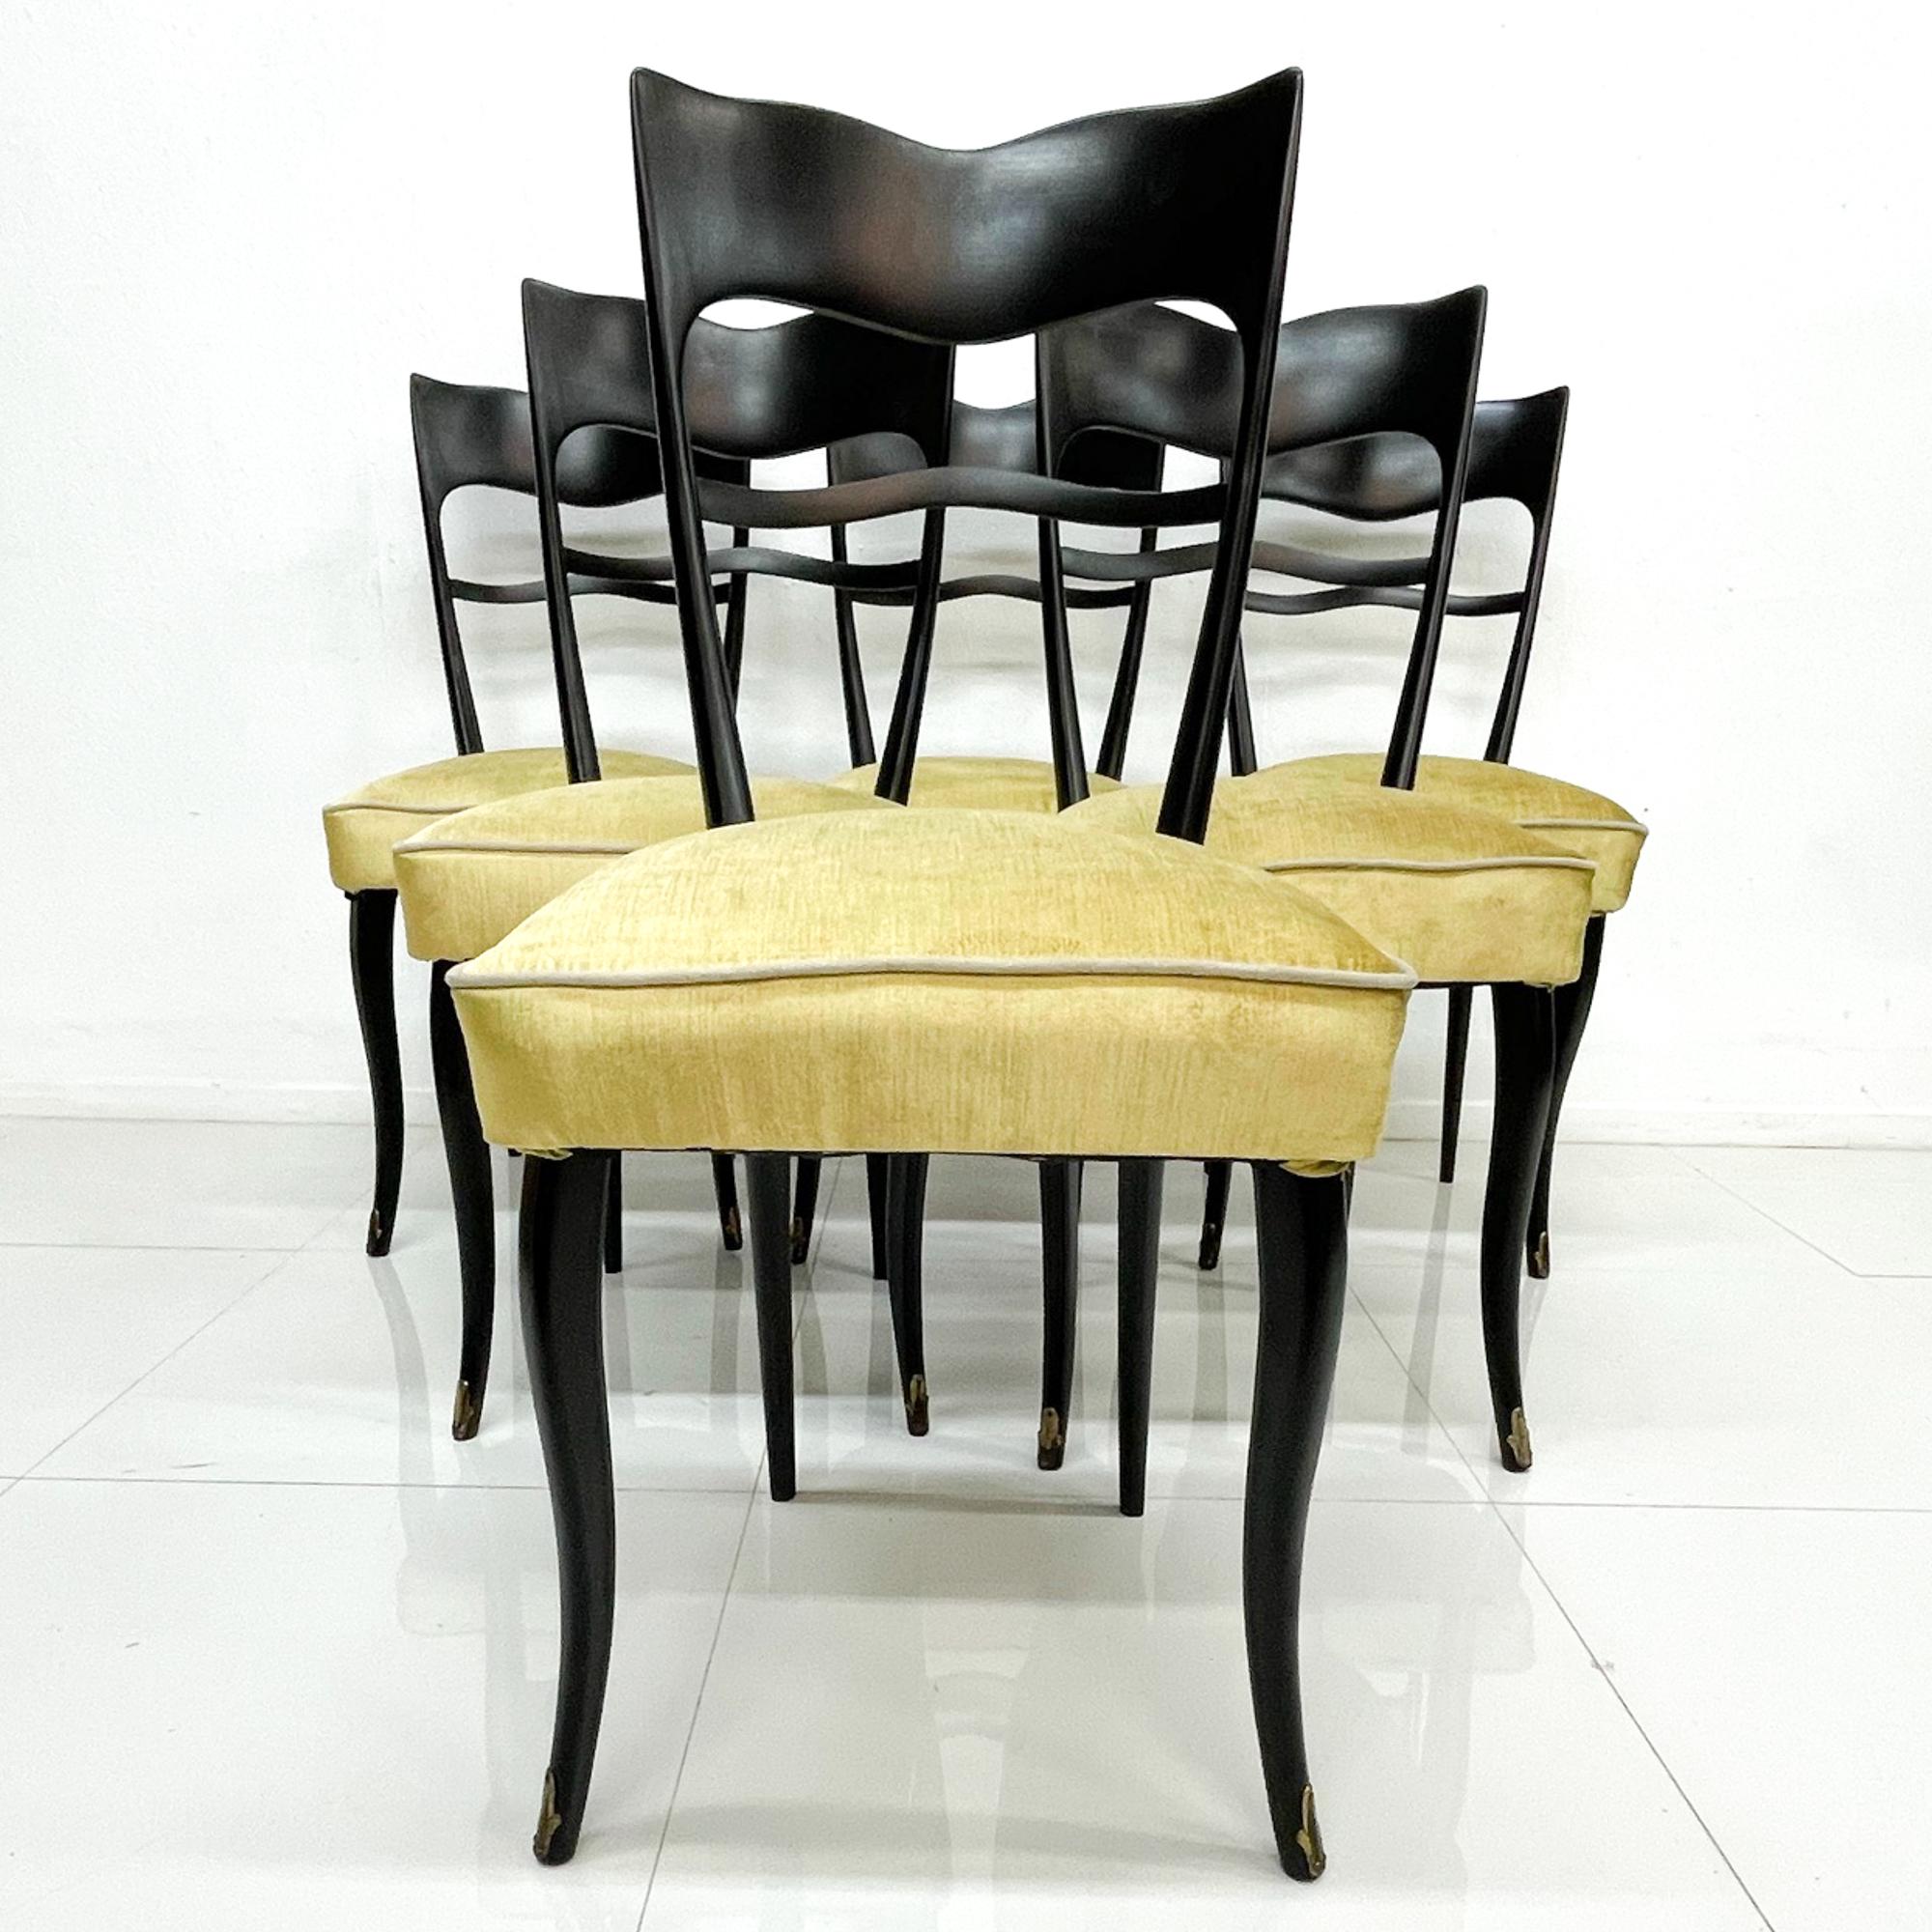 For your consideration a set of six (6) Italian dining chairs. Sculptural wooden chairs with elegant curved and clean modern lines. Wood has been restored to match the original specifications in black satin color. New upholstery in gold and silver.